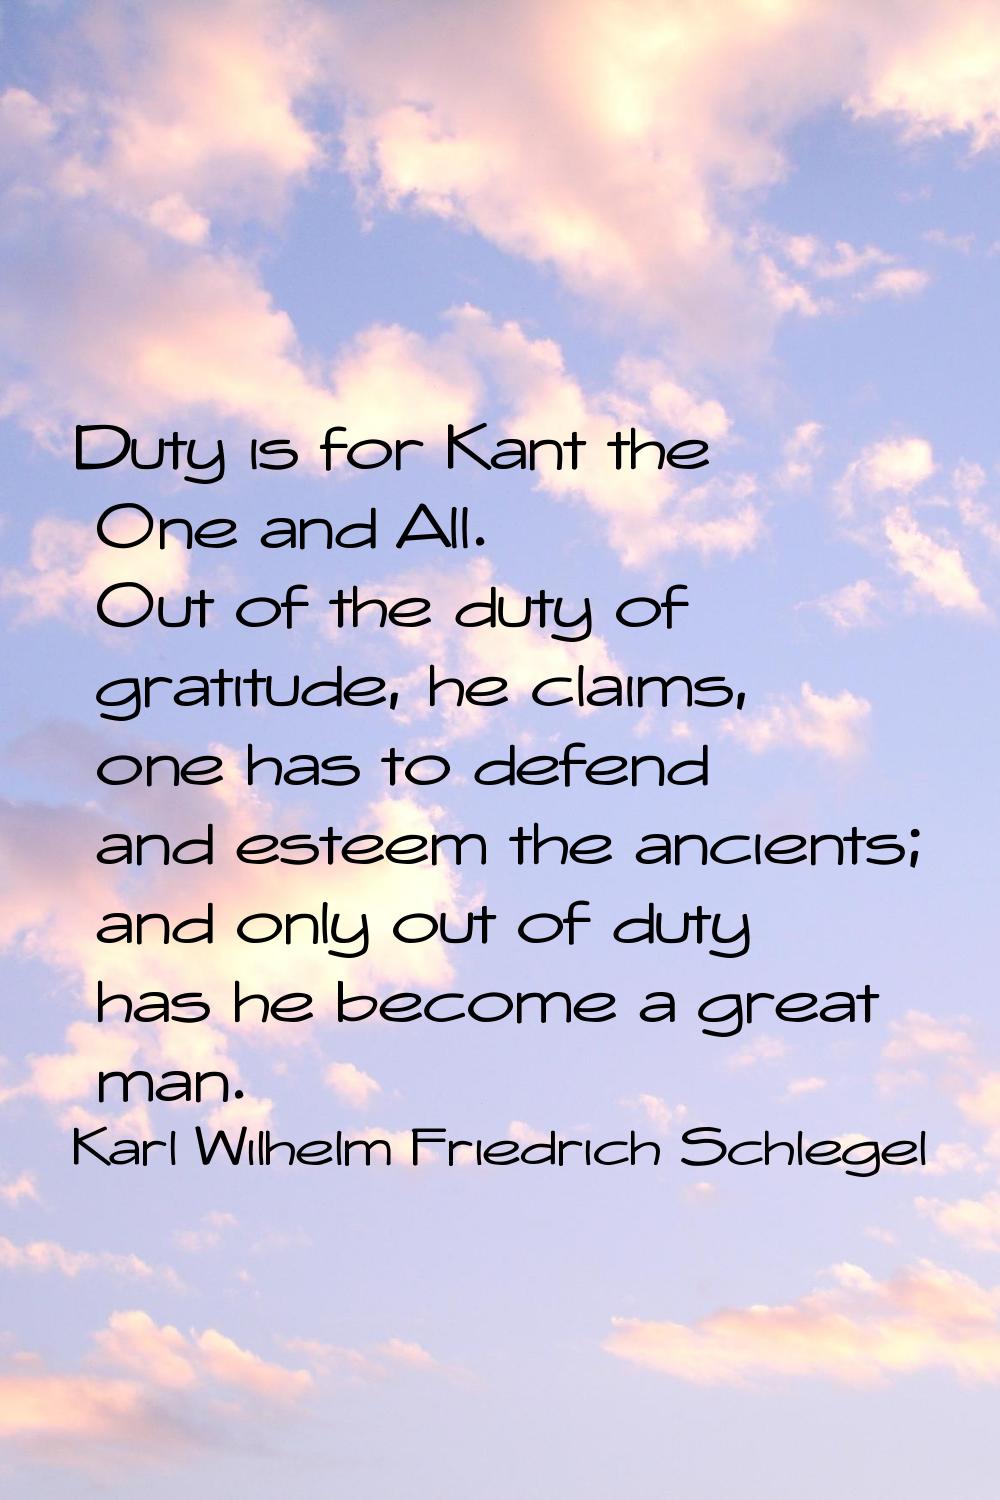 Duty is for Kant the One and All. Out of the duty of gratitude, he claims, one has to defend and es